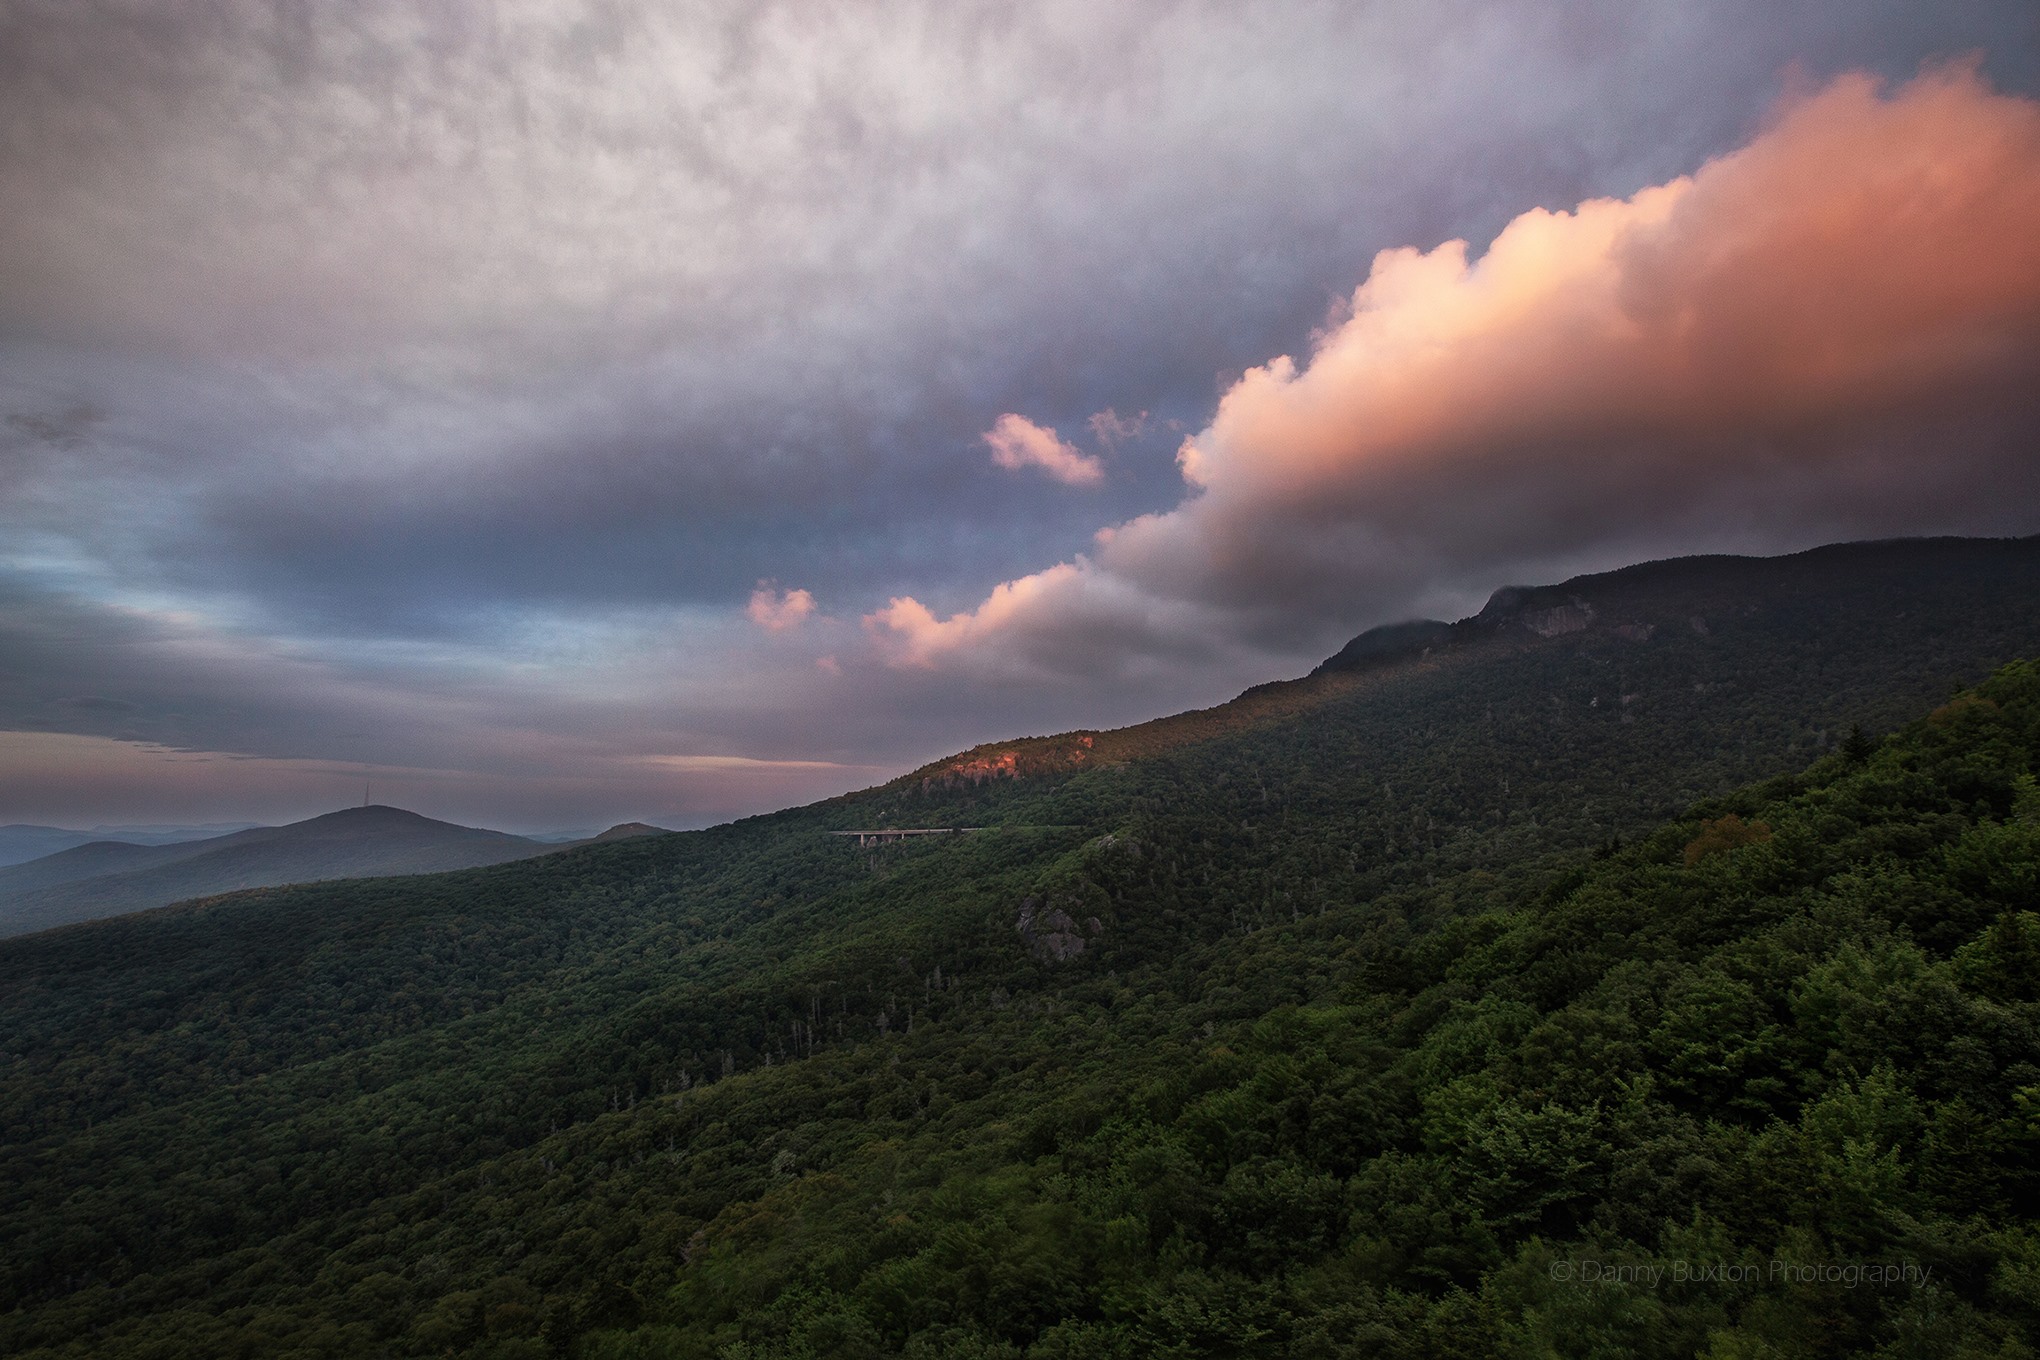 July 18_Grandfather Mtn_Danny Buxton Photography